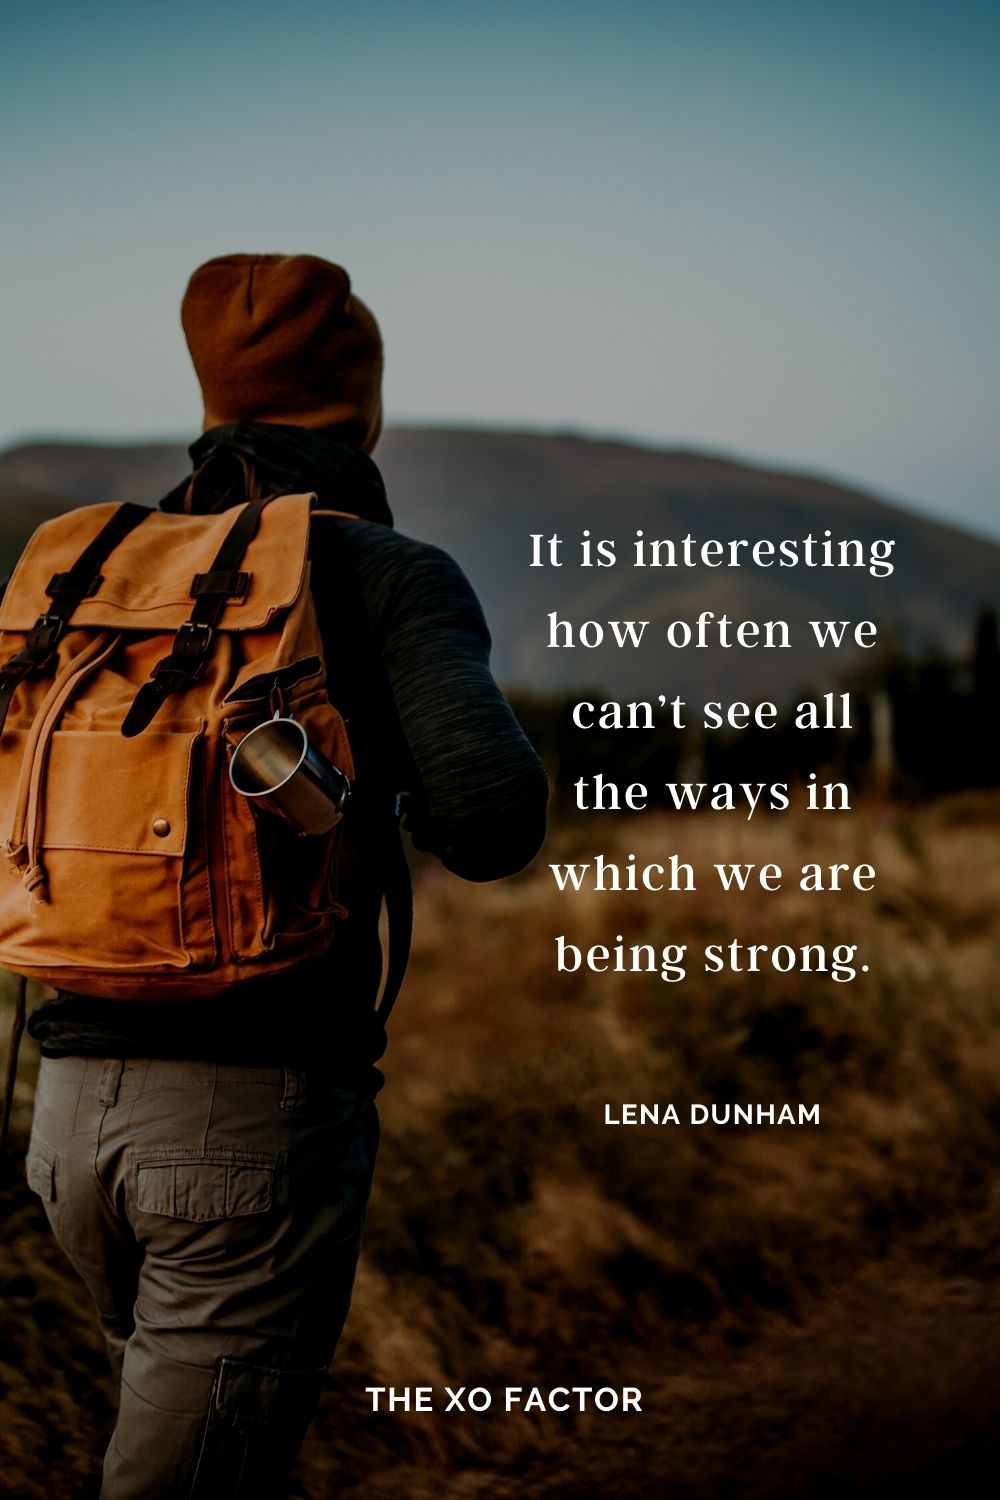 It is interesting how often we can’t see all the ways in which we are being strong. Lena Dunham